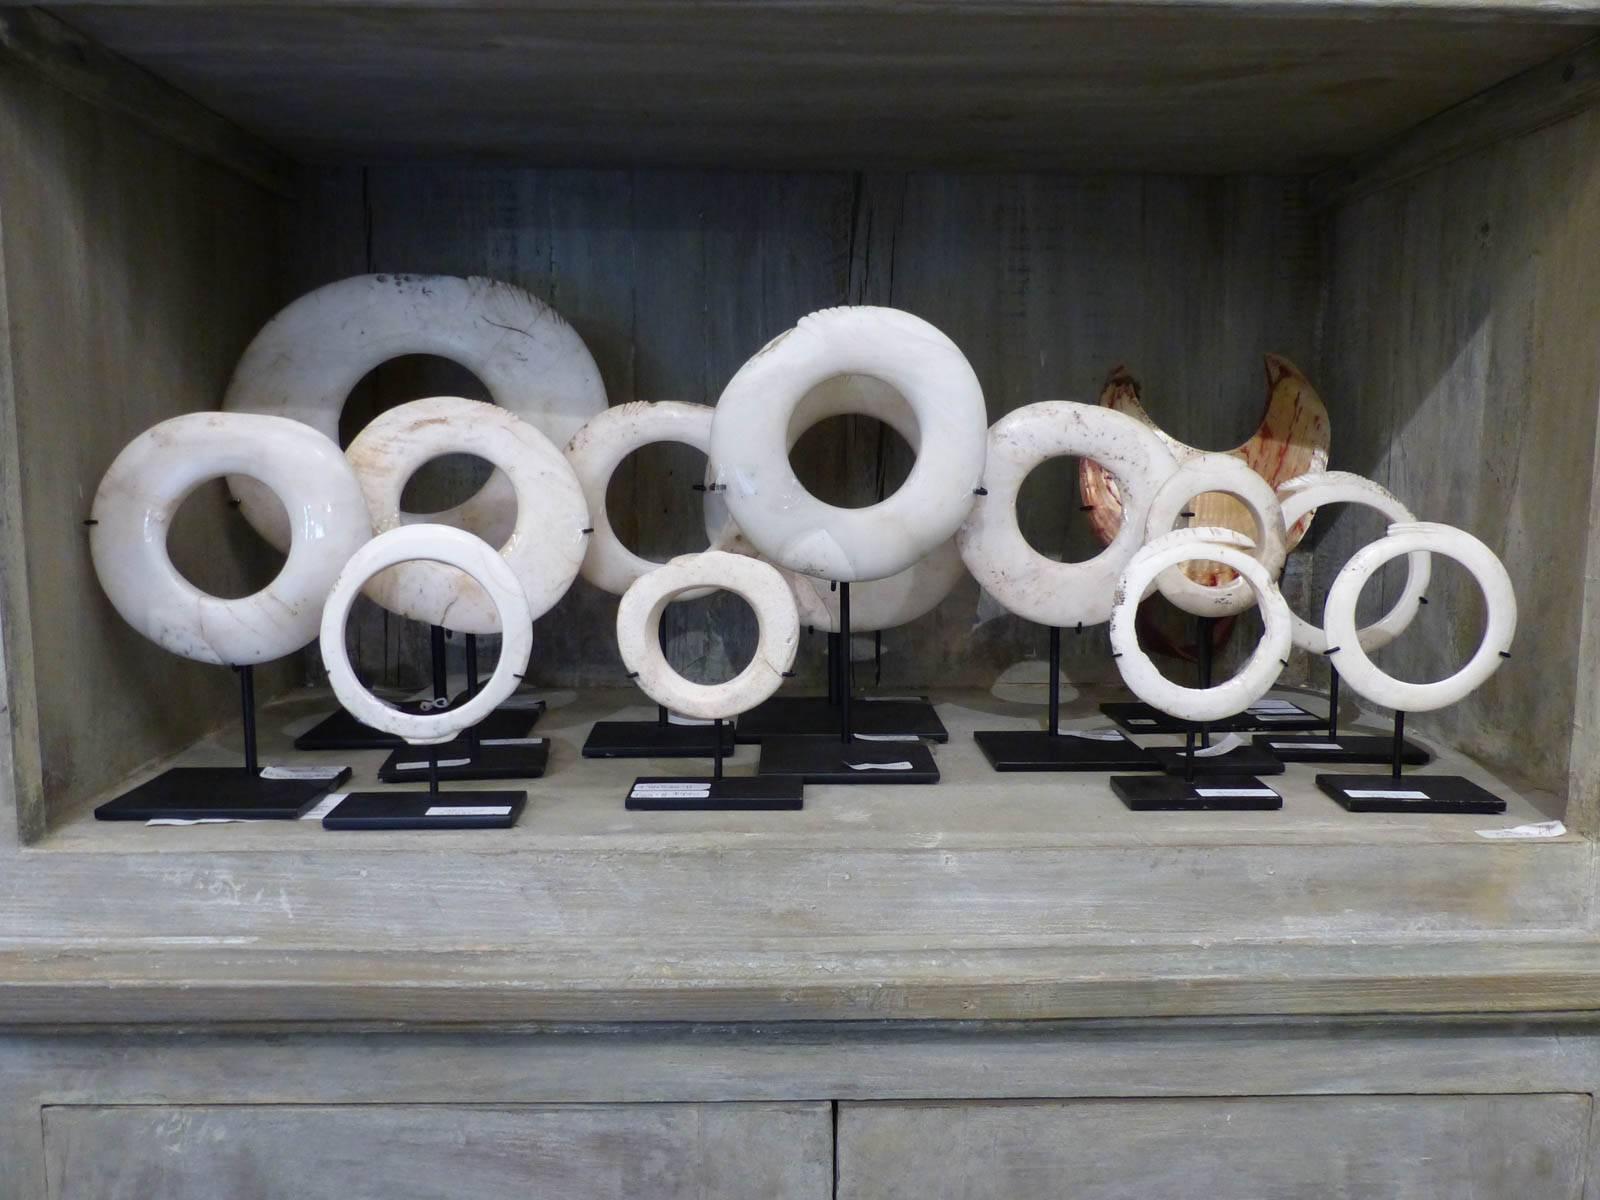 Single Yua Wenga shell currency from Papua New Guinea. Yua (Money) Wenga (Clam Rings) are clamshell rings cut with bamboo from giant clamshells. These rings are still being cut and used in ceremonies and exchanges. Yangoru, Sasauia, Maprik and